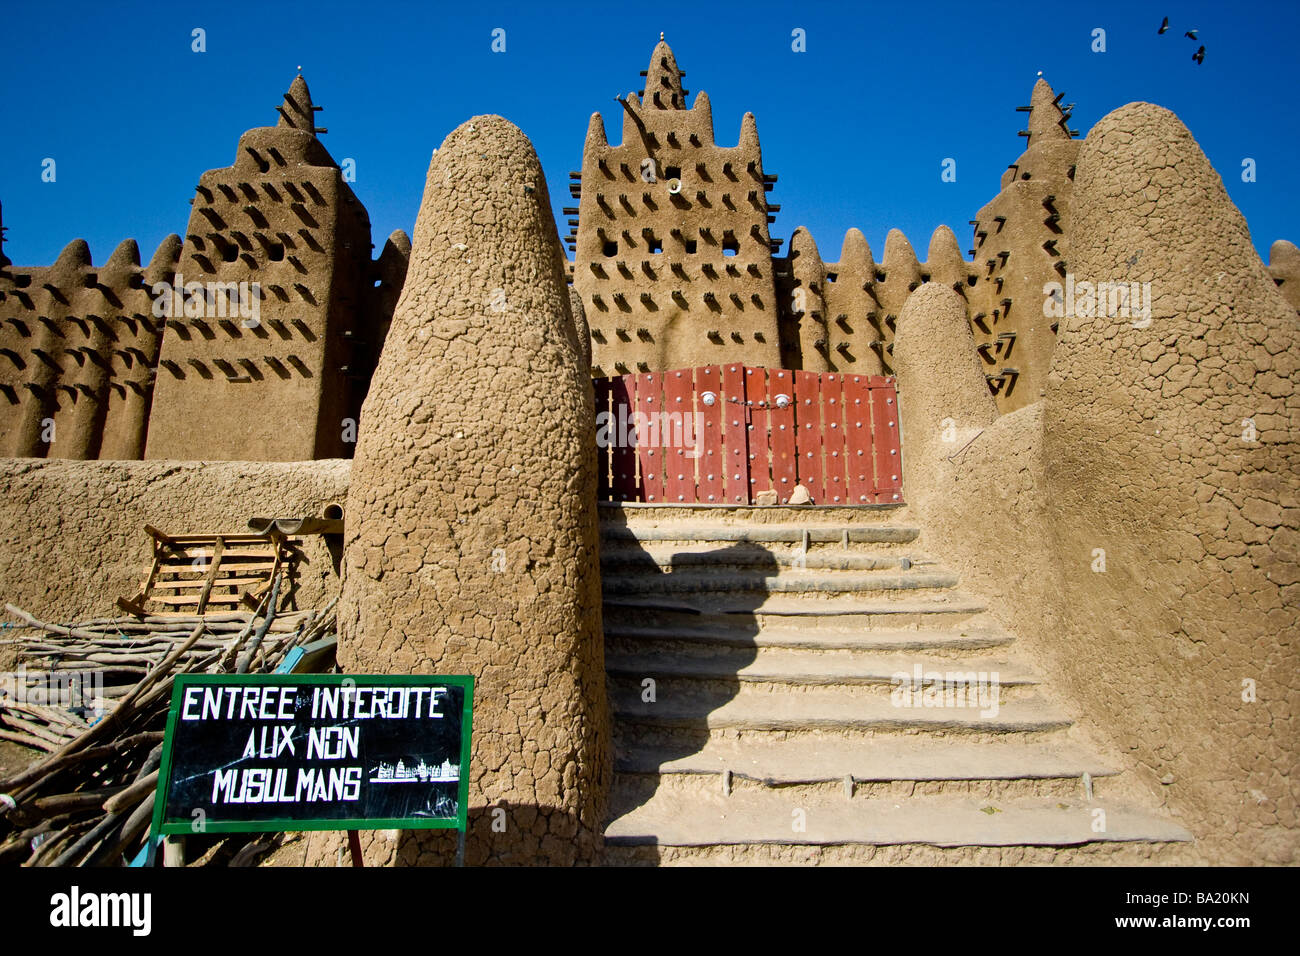 Entry Forbidden to Non Muslims at the Great Mosque in Djenne Mali Stock Photo